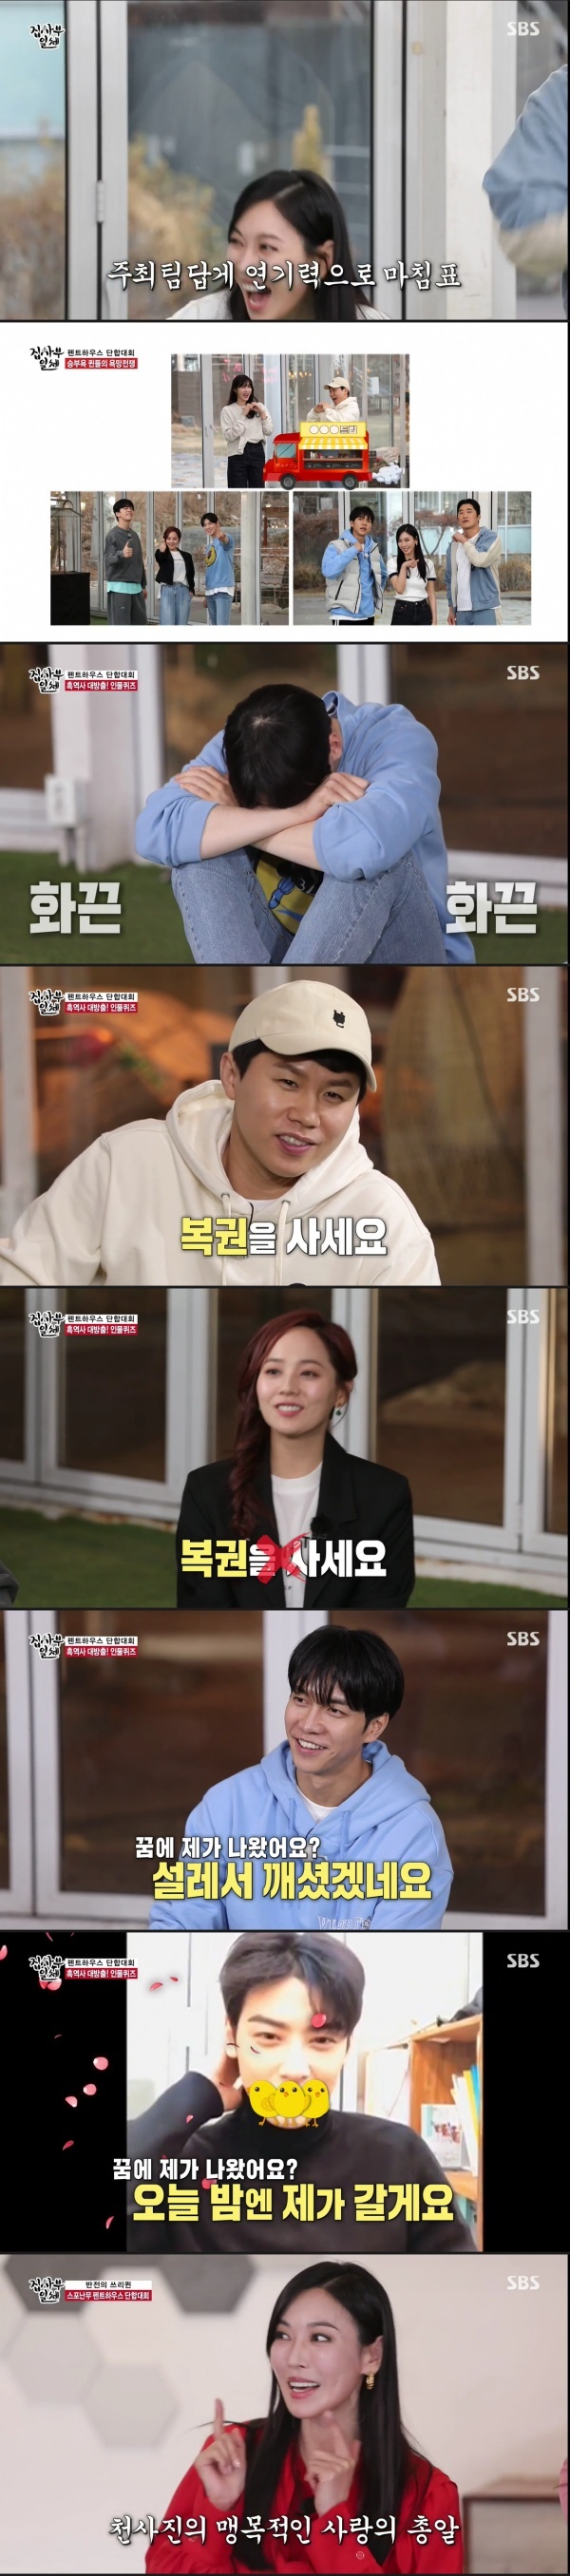 Kim So-yeon said he practiced Piano himself for Penthouse.Lee Ji-ah, Eugene and Kim So-yeon appeared as masters on SBS All The Butlers broadcast on the 21st.Lee Seung-gi asked Kim So-yeon, Ive done Heel, and Kim So-yeon said he did Heel in Everything on Eve 20 years ago.Kim So-yeon said, Heel is the second since then, and many people say that Heel did not do much.Lee Seung-gi said, I thought I did Heel once or twice. Kim So-yeon said, I did not have Heel, but I look like Heel.Lee Ji-ah said, There is something salty about So-yeon, even though he is a real mean Heel.It seems that So-yeons acting ability is what can be drawn by those who see it. Yang Se-hyeong laughed, saying, If it was not this acting, I did not see it.On this day, Actor Lee Ji-ah, Kim So-yeon, and Eugene appeared in the Penthouse feature, and mentioned the Piano scene of Kim So-yeon,Kim So-yeon said, I practiced for my work, I originally hit the early chopstick march. I learned from my big sister in a video call, I can not see Sheet music shamefully, I memorized Sheet music unconditionally.Lee Seung-gi told Lee Ji-ah that the scene of talking to Oh Yoon-hee after knowing the real killer who killed his daughter was impressive.When asked what he thought he acted, Lee Ji-ah said, I was worried about that feeling a lot. I thought there would be an impact to cool it.Lee Ji-ah said, I was surprised, it was a shock.I was really surprised when I was cheating with Dantae. Lee Ji-ah said, I still believe that I am a believer, but I did not think I would do this.I just got a sense of betrayal from the script, he said, and Eugene admitted himself to being a bad person.And the three actors said they did not really know the spoilers, and that when the actors gathered together, they guessed about the future development.However, it attracted attention by saying that all speculation is different from actual development.At this time, Yang Se-hyeong asked, So you were surprised to see the season 2 script, and Lee Ji-ah said, Oh, I was surprised.Shims death in Season 1, and whether or not he appeared in Season 2 was now covered in the veil. Lee Ji-ah said, I am not talking about Season 2 but I am talking about Season 1.Lee Ji-ah, who also says How do you spoof cool?On the other hand, SBS All The Butlers is broadcast every Sunday at 6:30 pm.